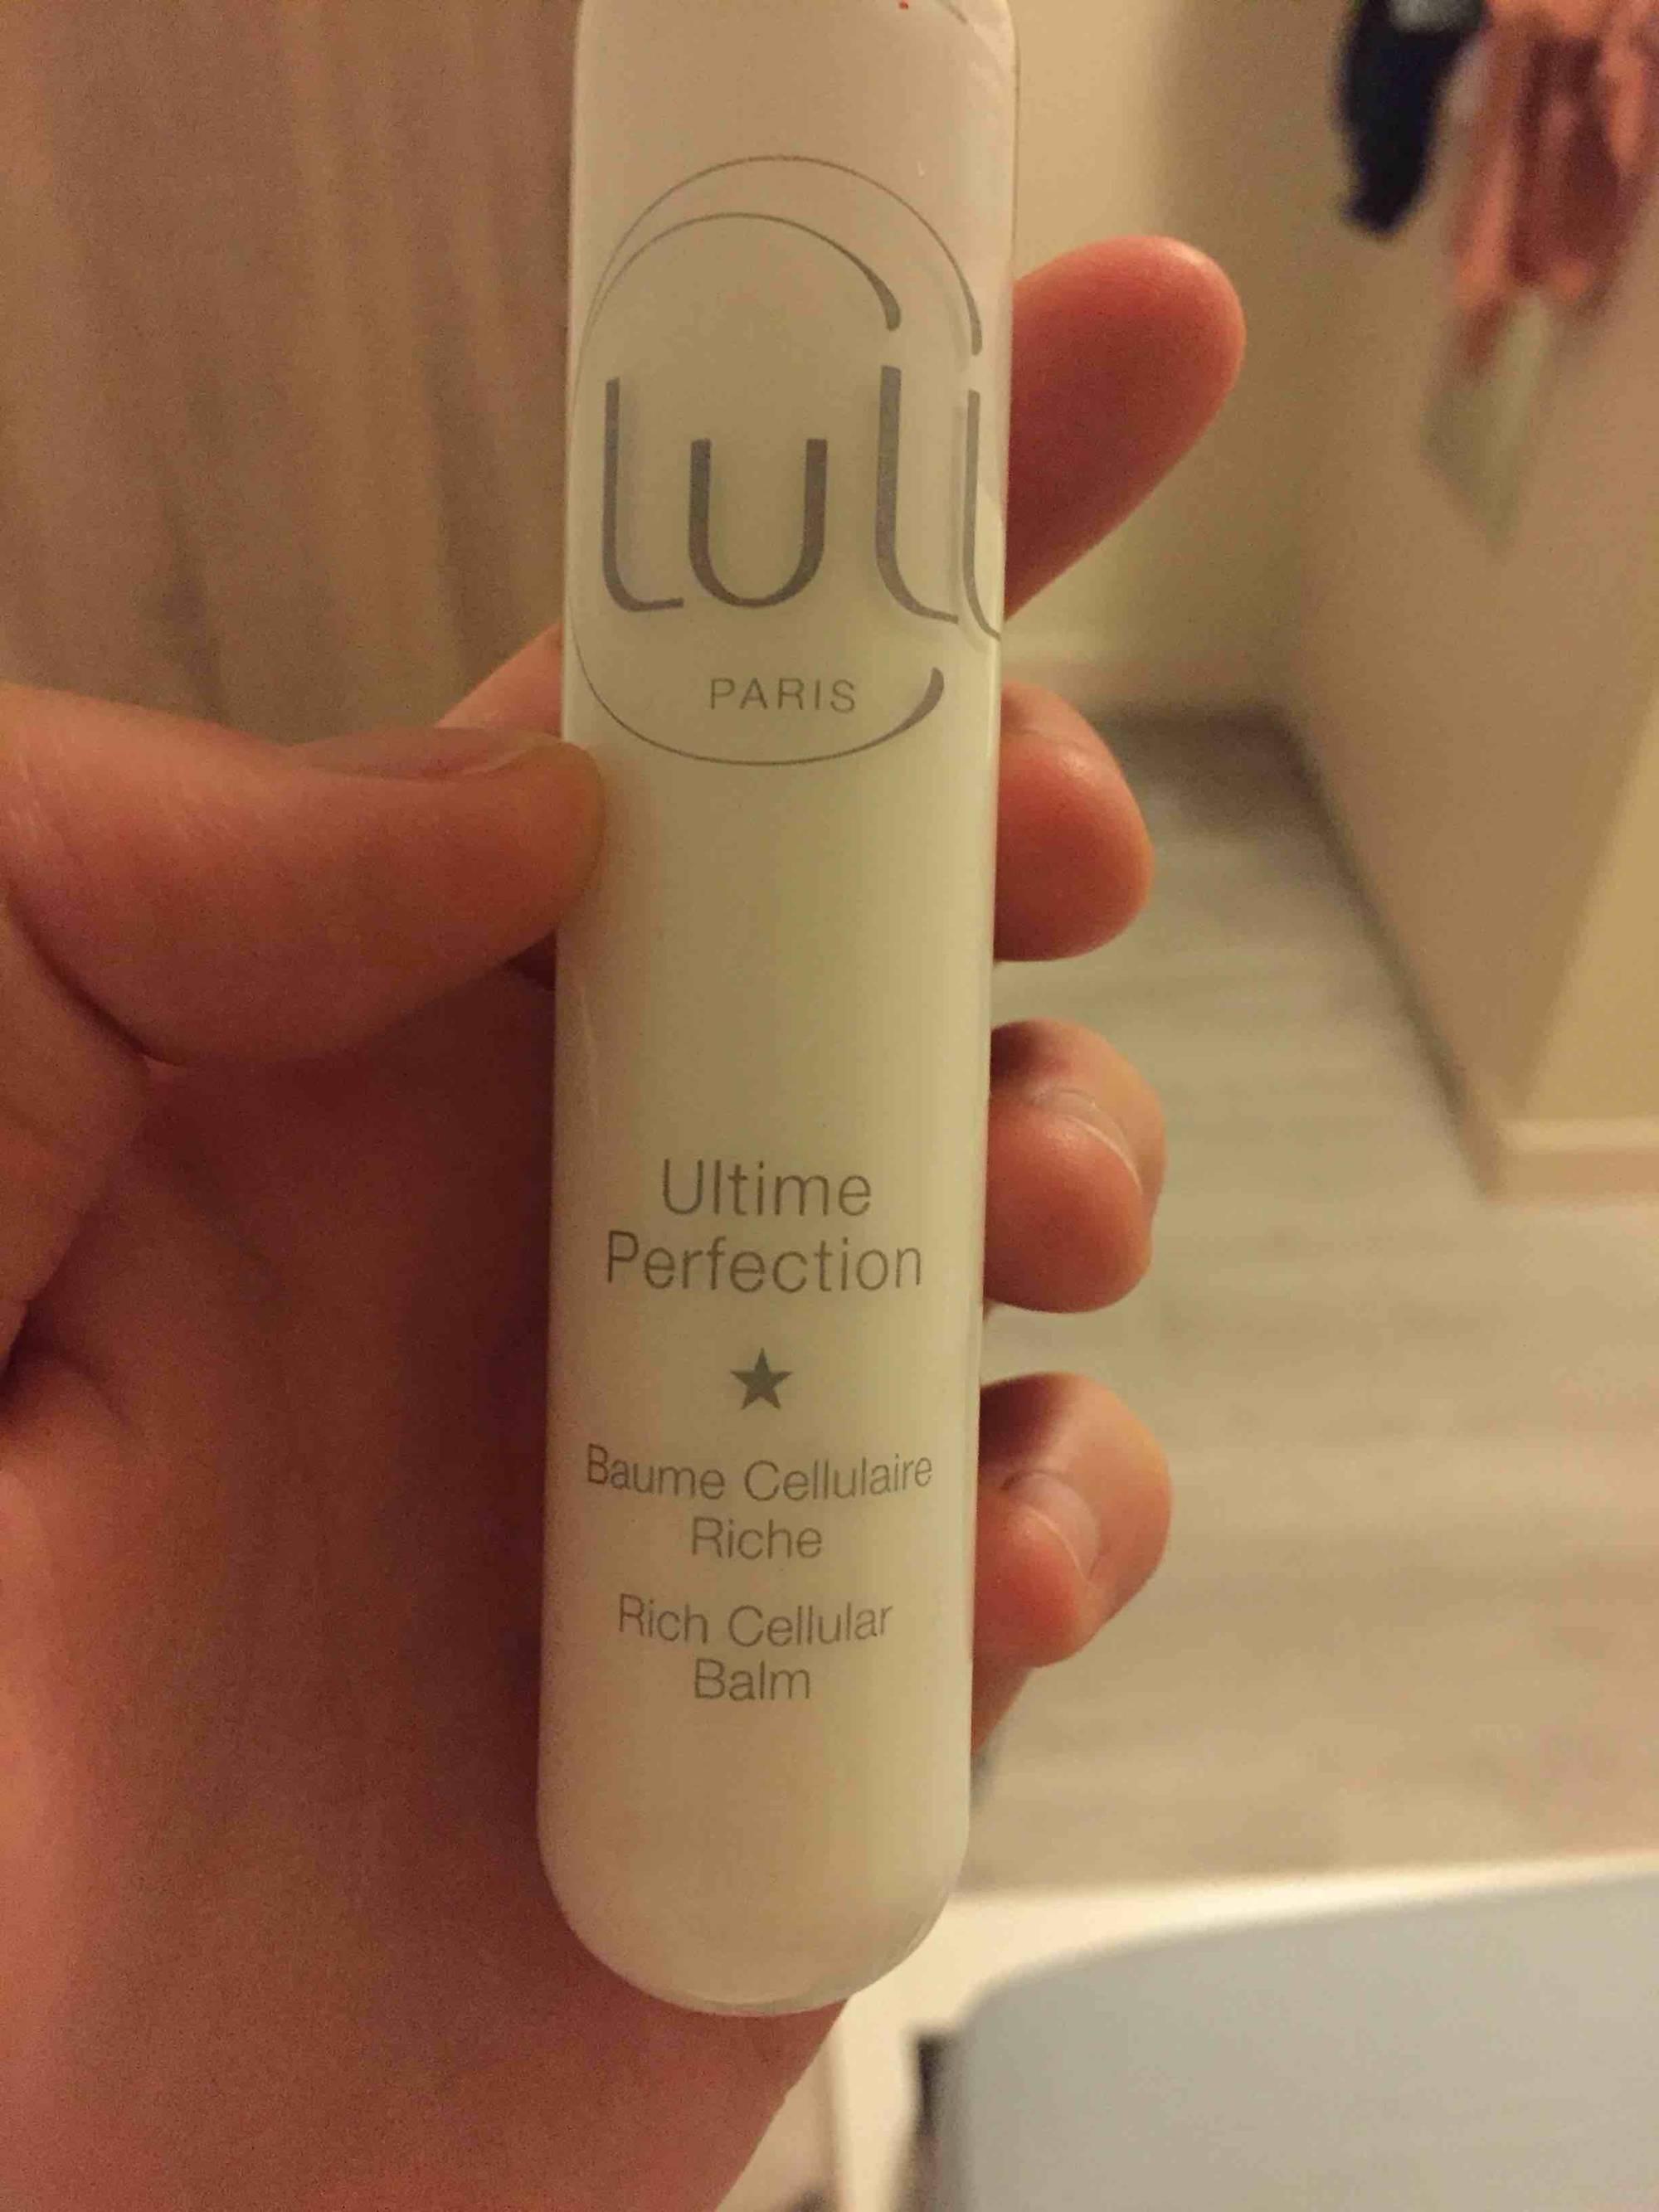 LULL - Ultime protection - Baume cellulaire riche